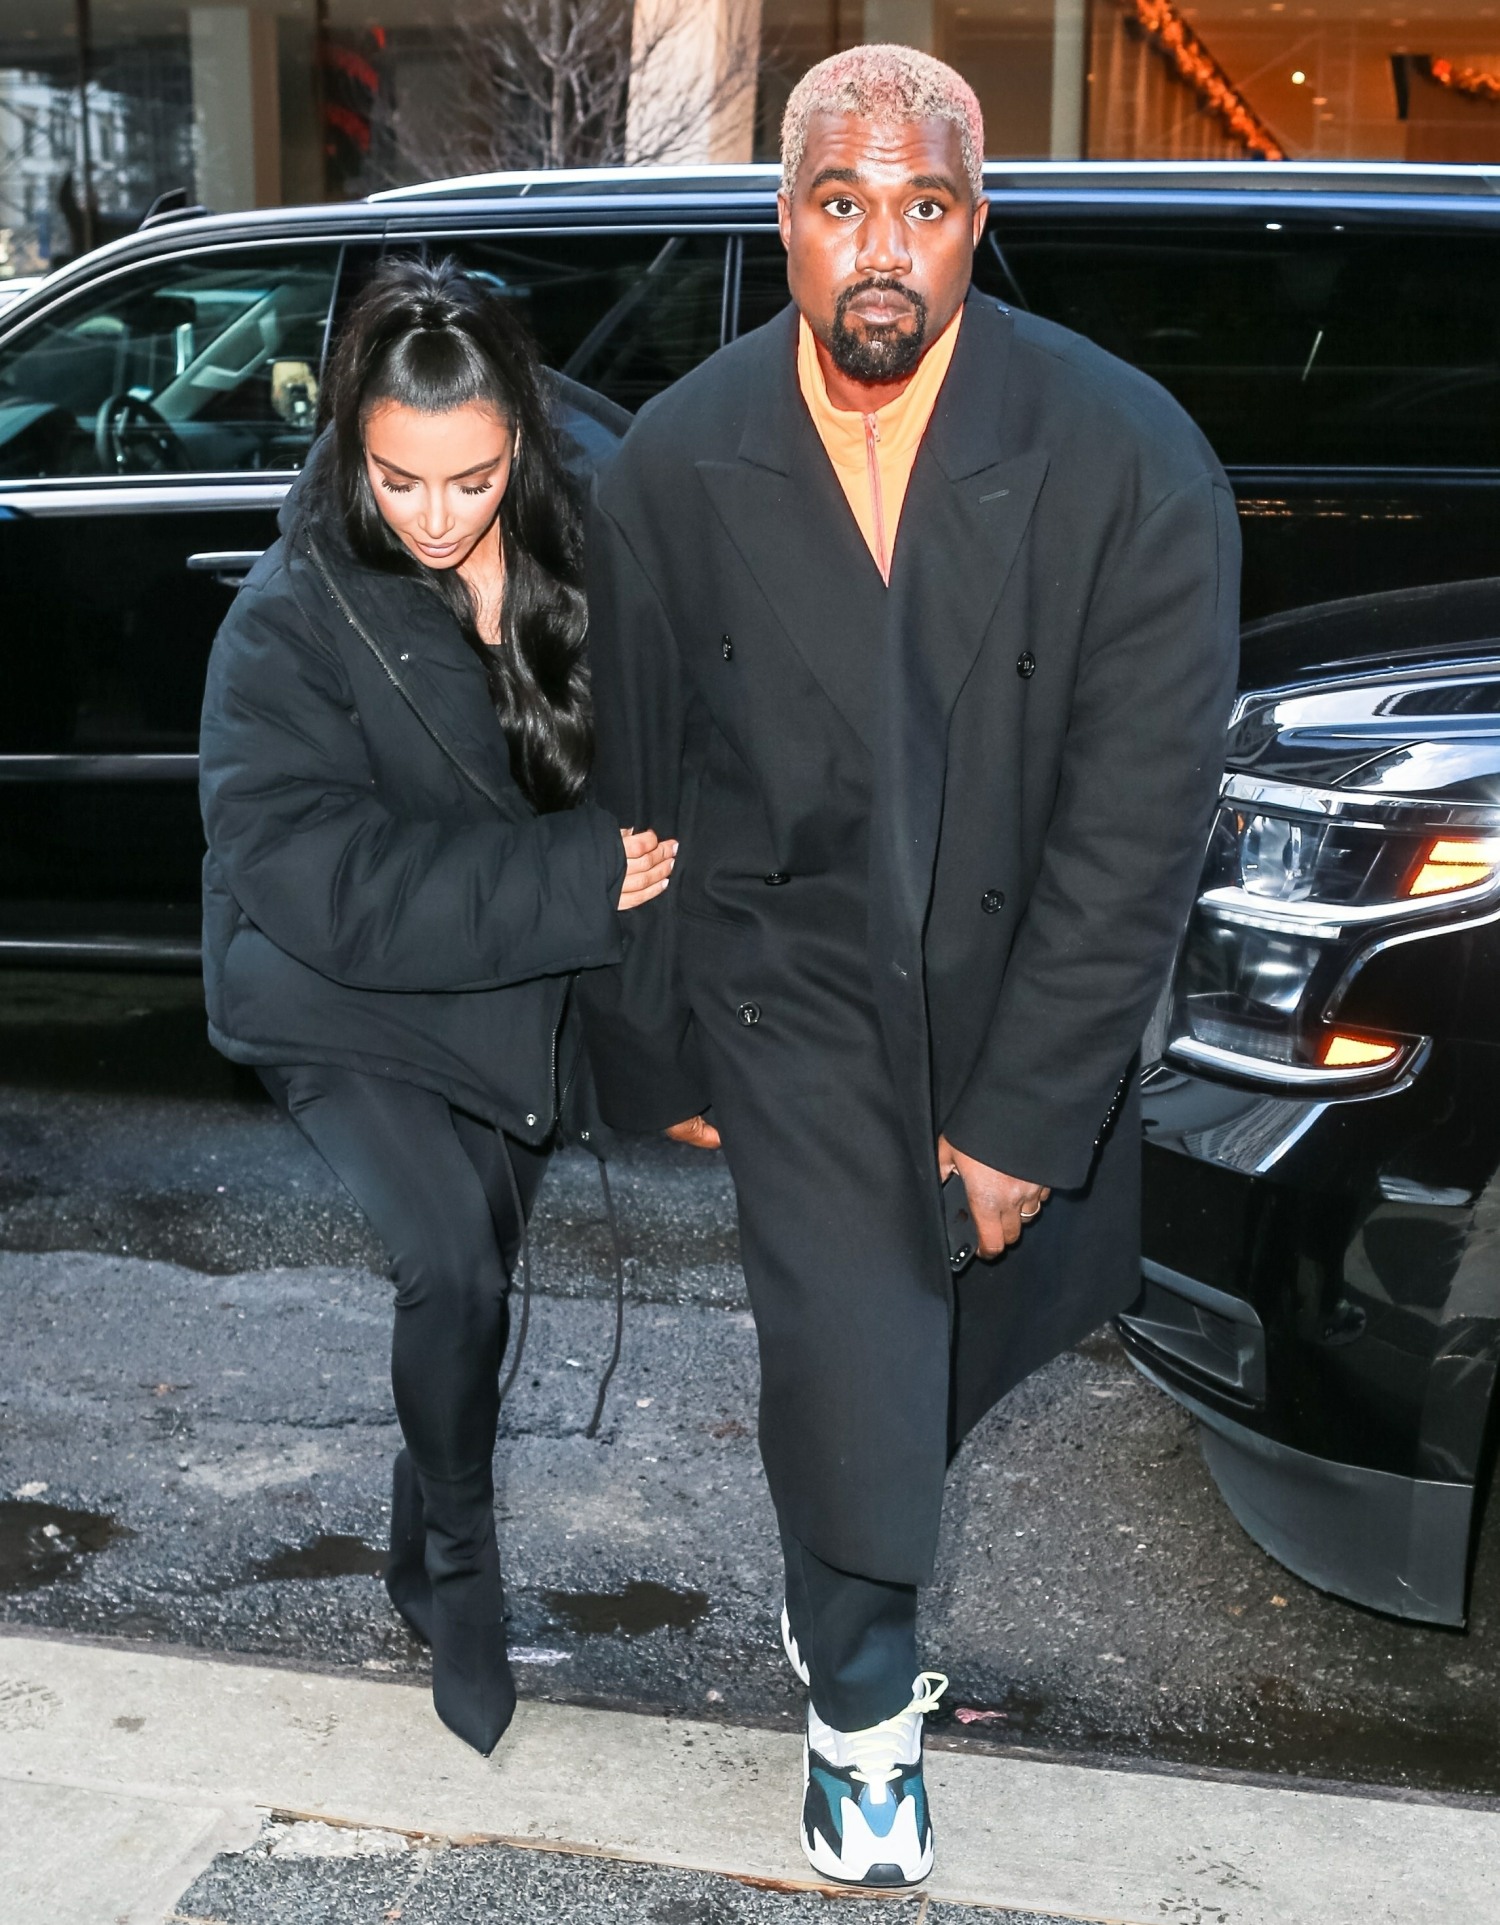 Kim Kardashian and Kanye West look bundled up for the cold NYC weather